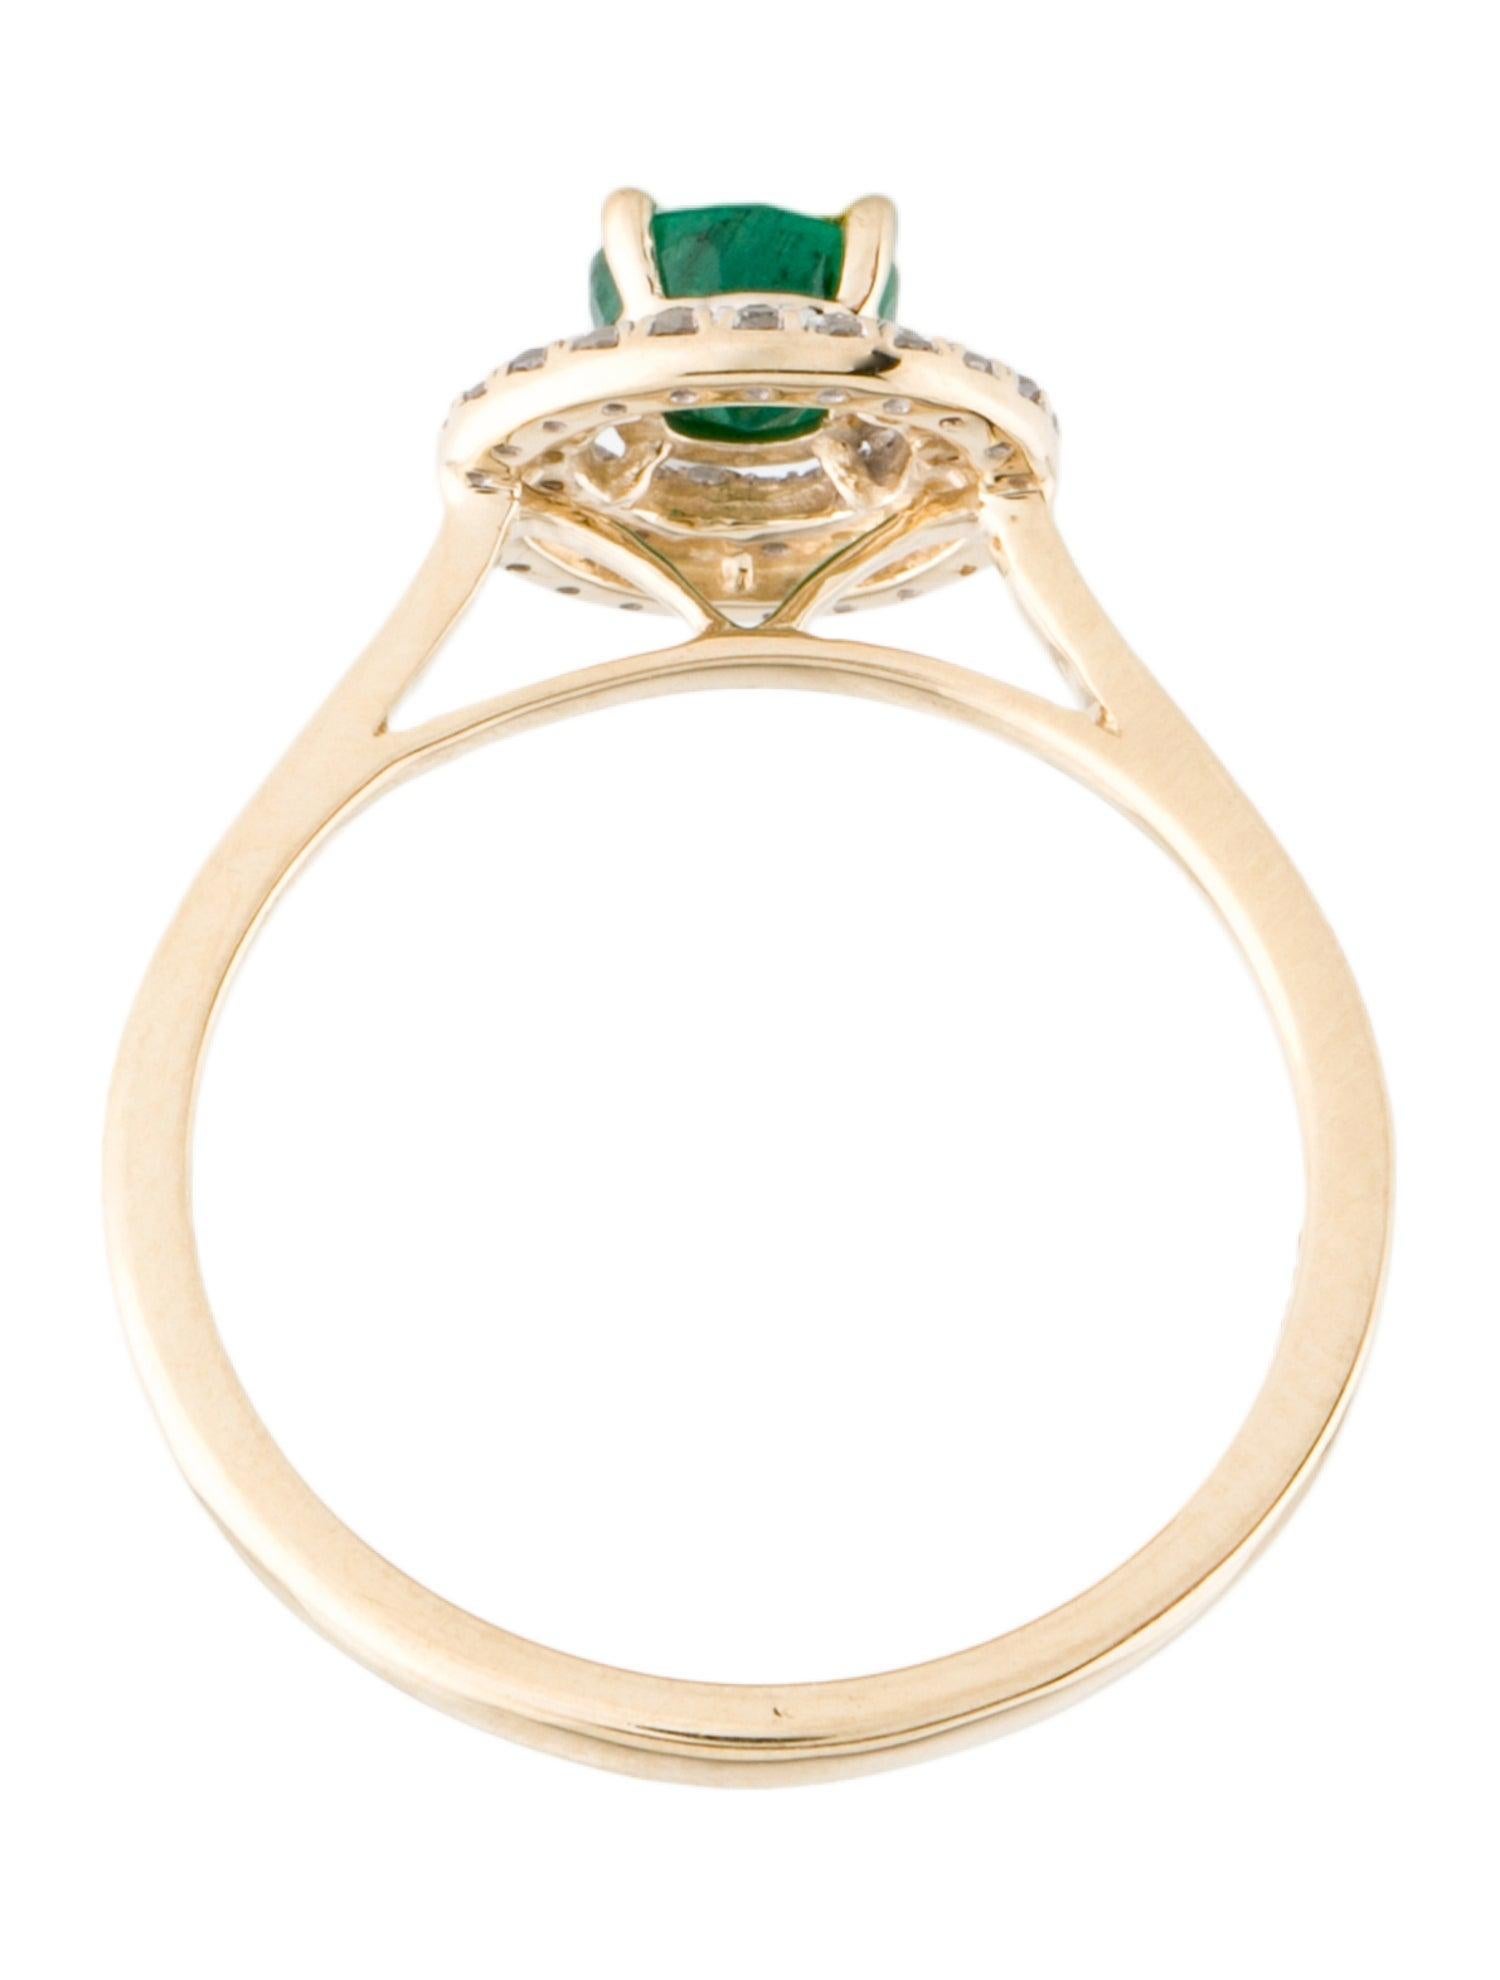 Luxurious 14K Emerald & Diamond Cocktail Ring - Size 6.25  Elegant Vintage Ring In New Condition For Sale In Holtsville, NY